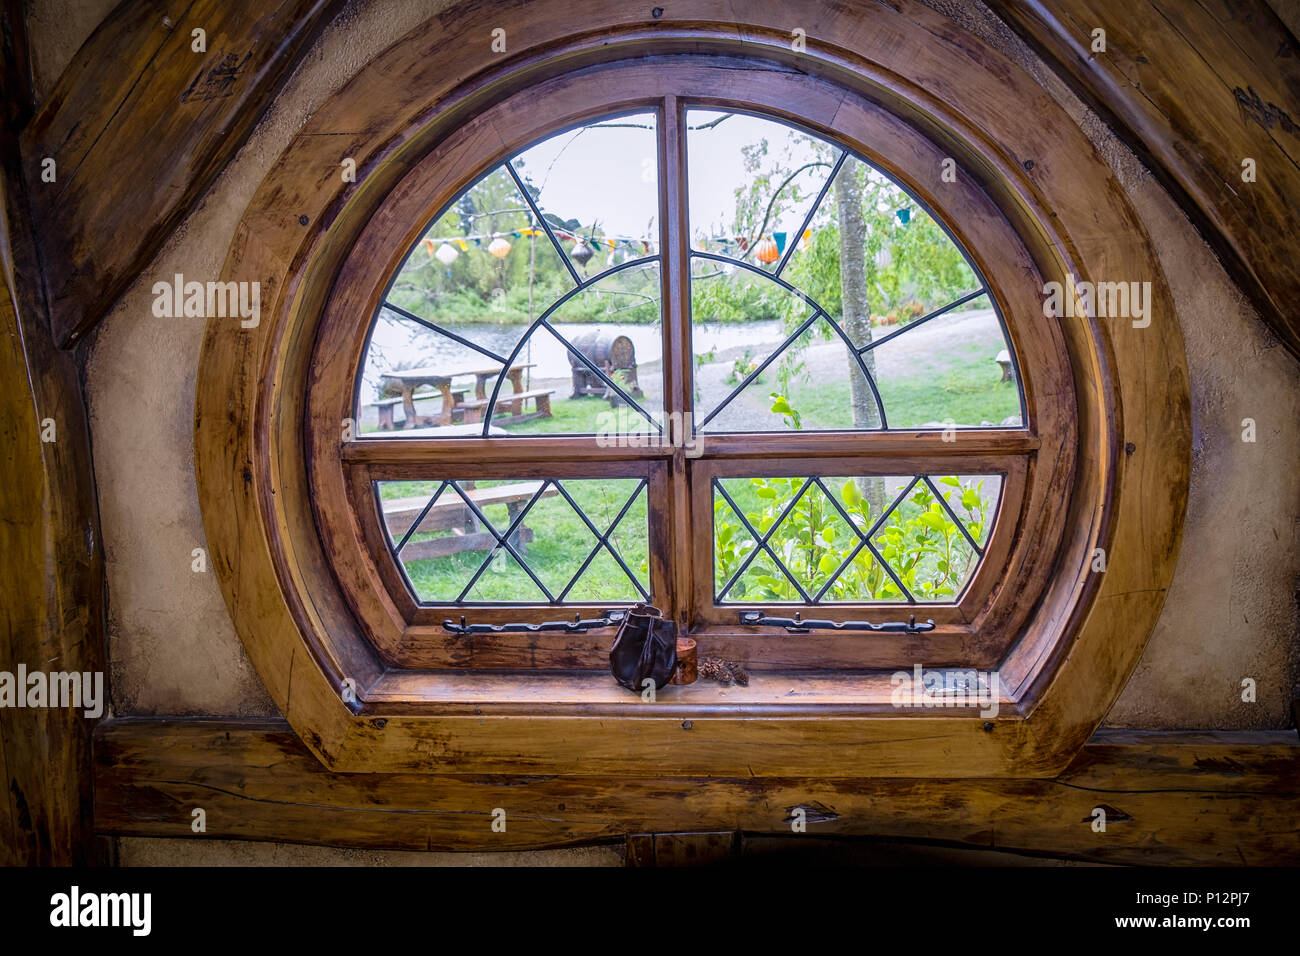 Looking out of the window from the Green Dragon Inn in the Shire in Hobbiton, Hinuera, Matamata, New Zealand Stock Photo